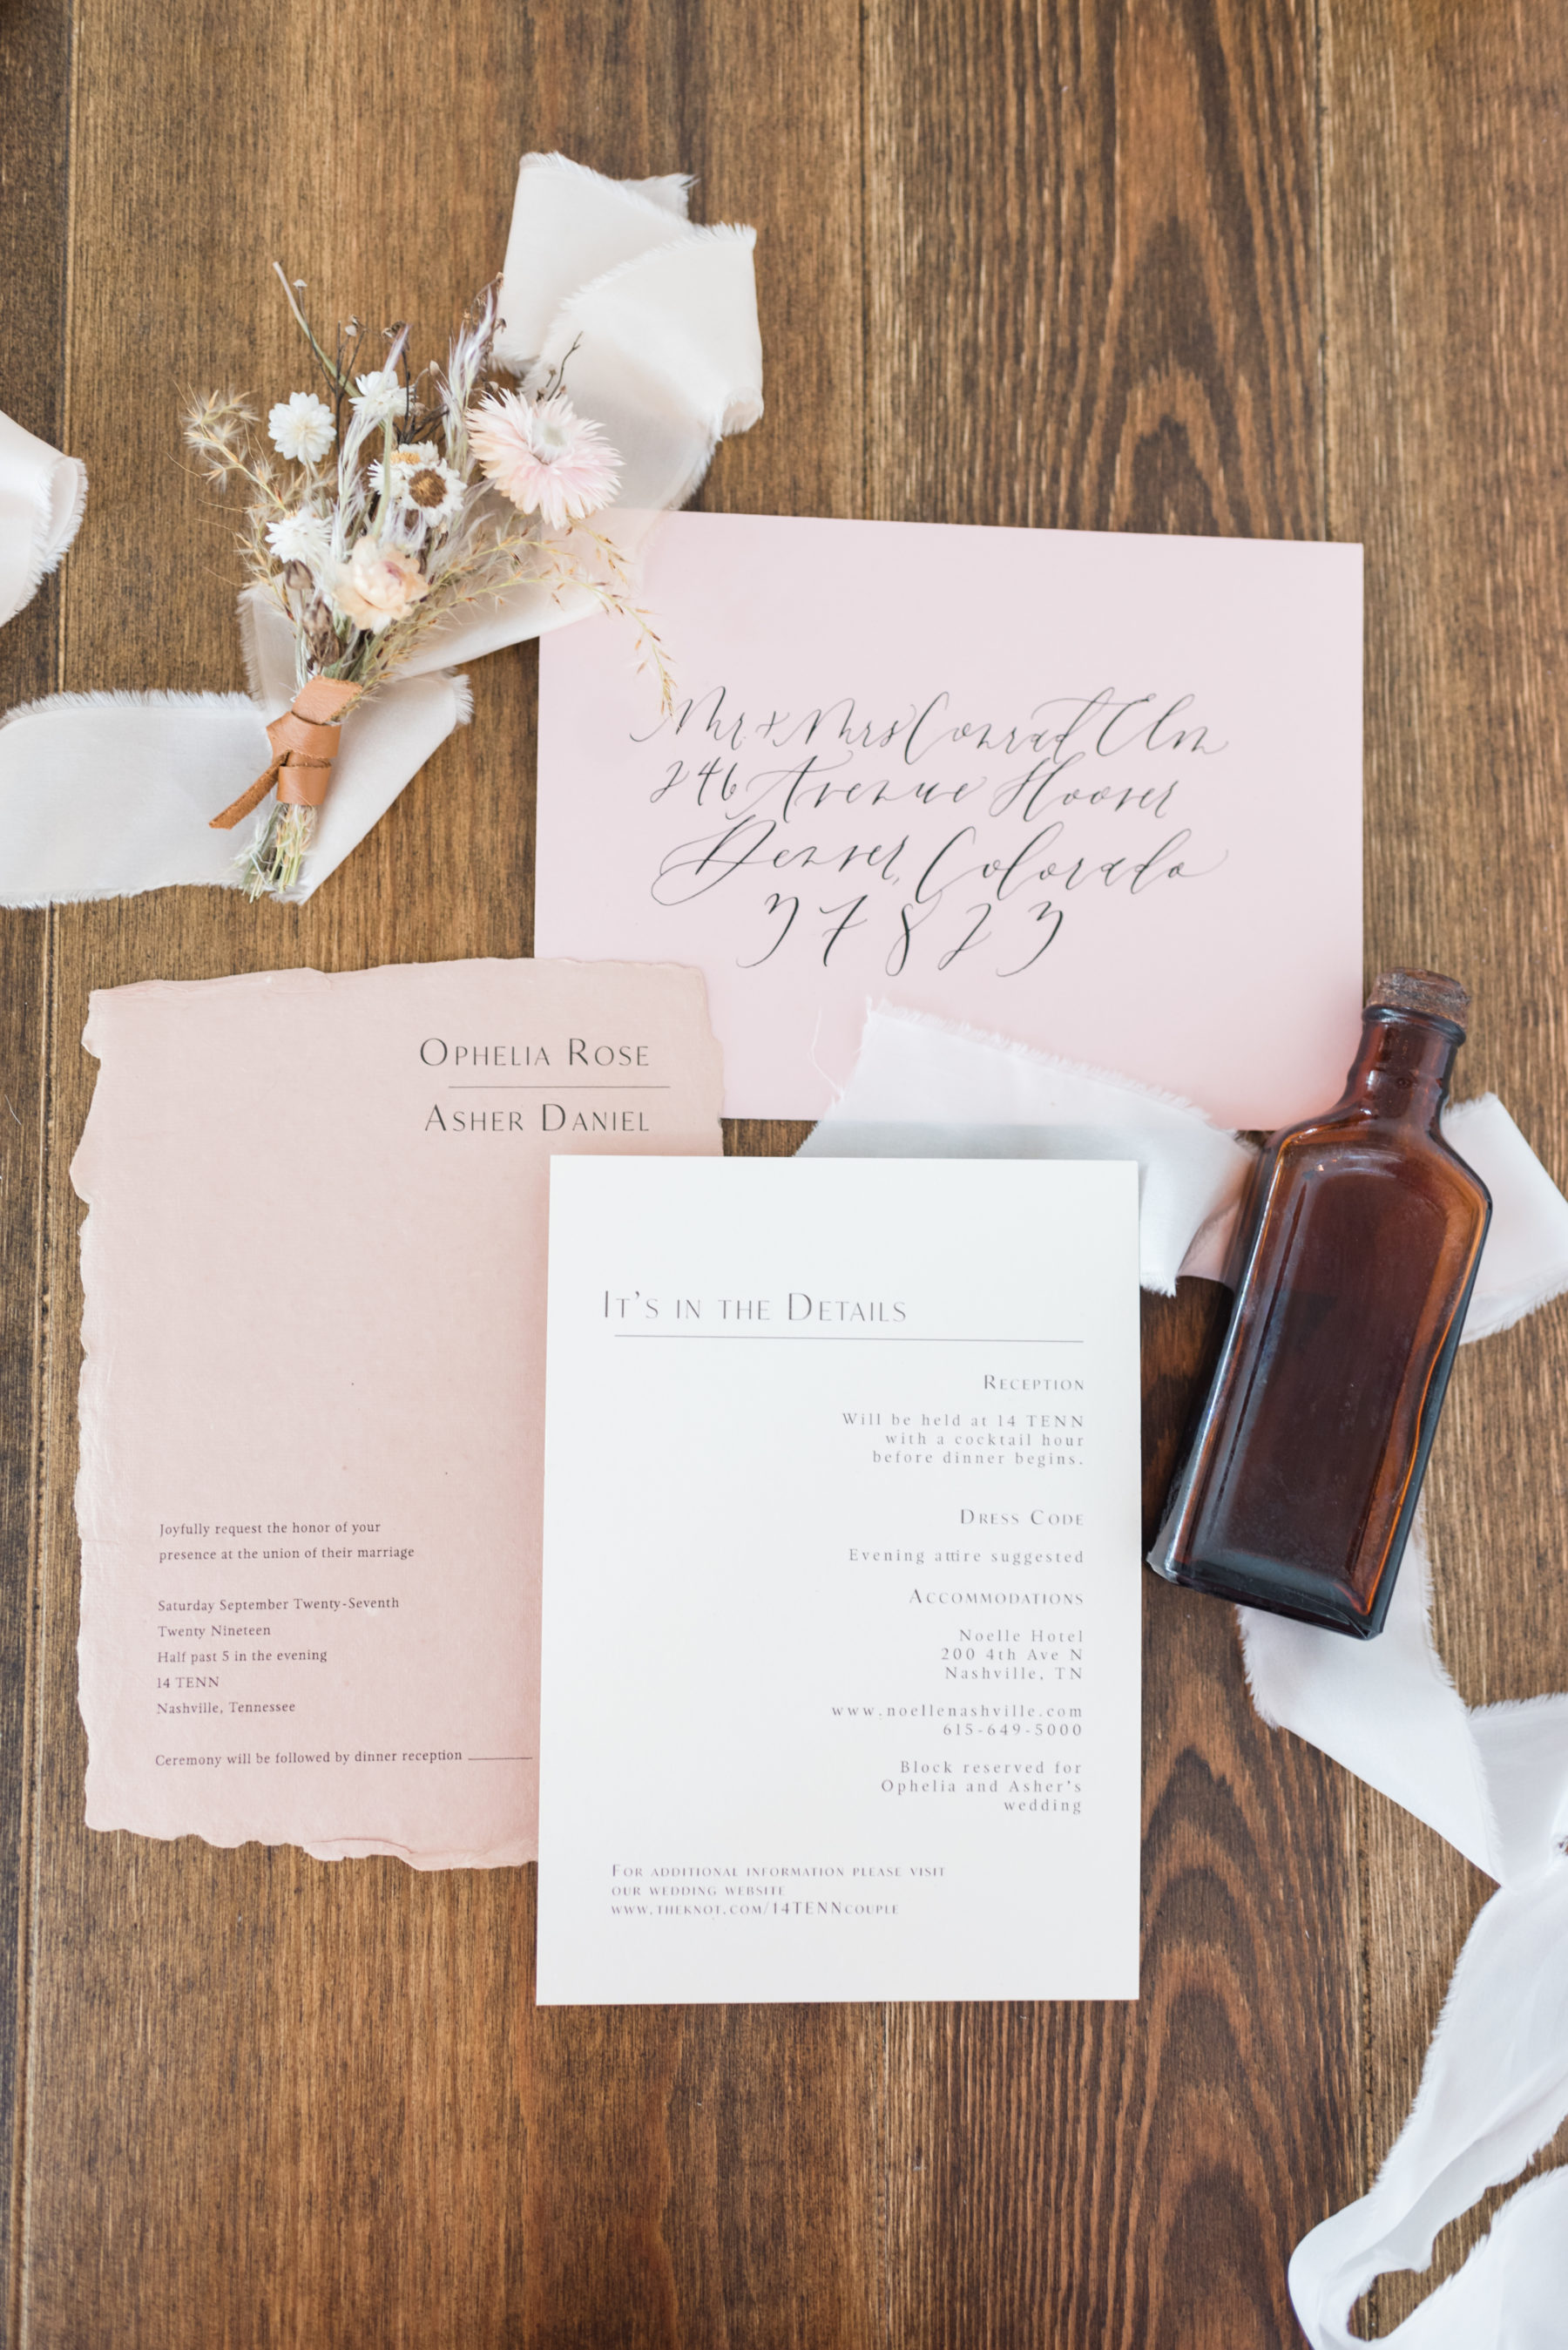 Blush Pink Wedding Invitation Suite: Organic Eco-Friendly Wedding Styled Shoot featured on Nashville Bride Guide